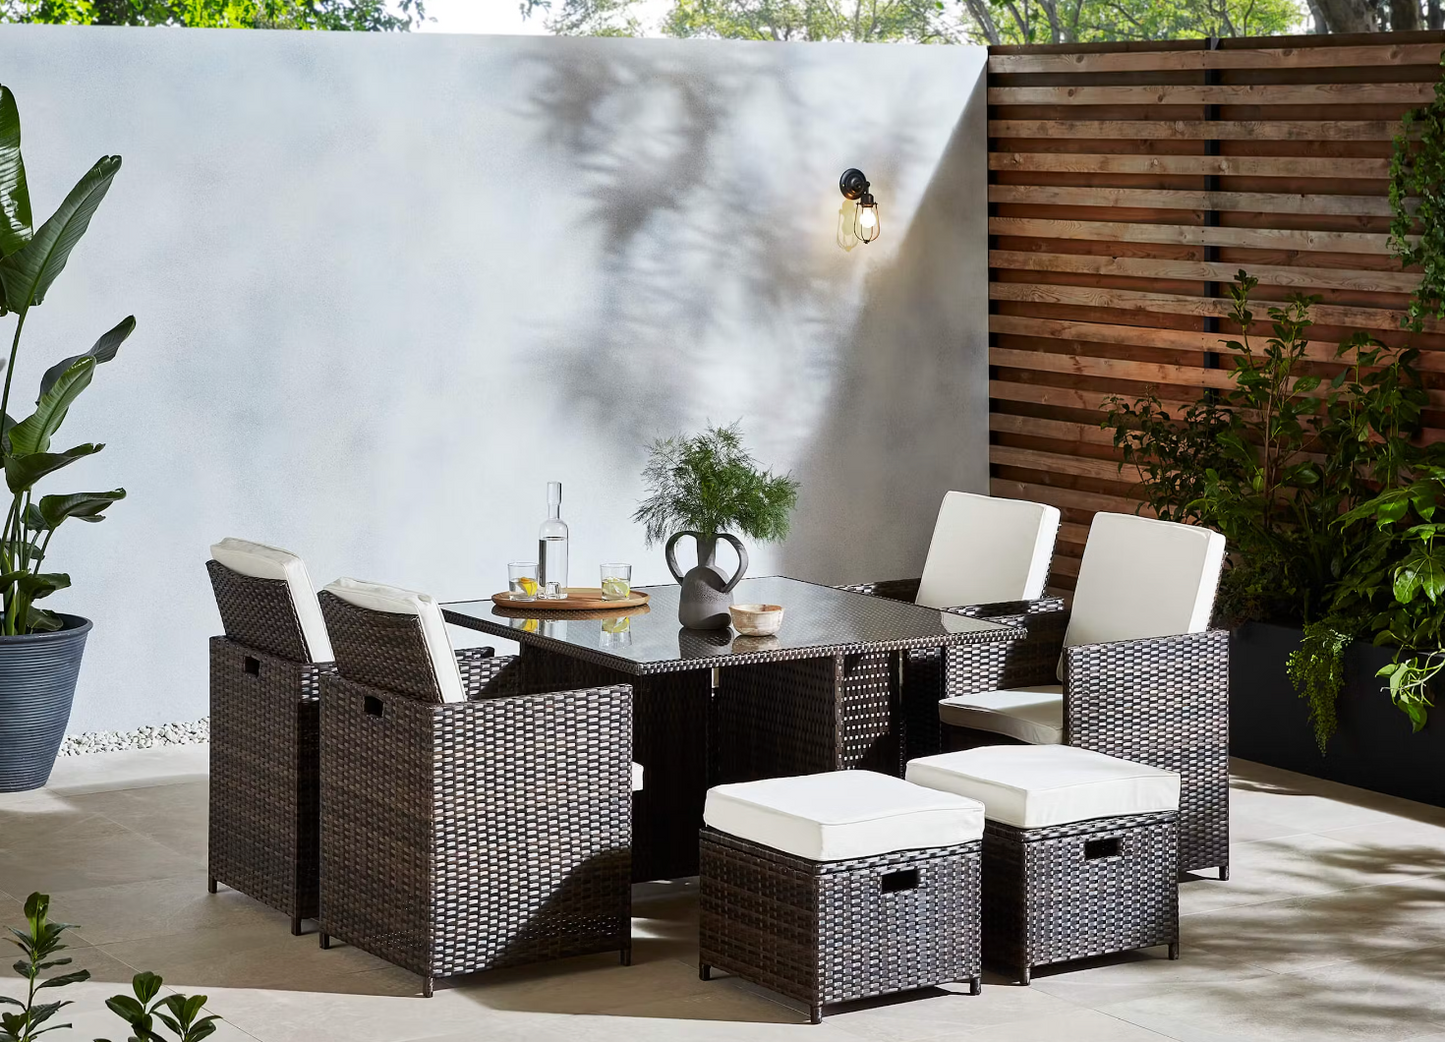 Rio Rattan Cube 8 Seat Outdoor Dining Set - Brown.